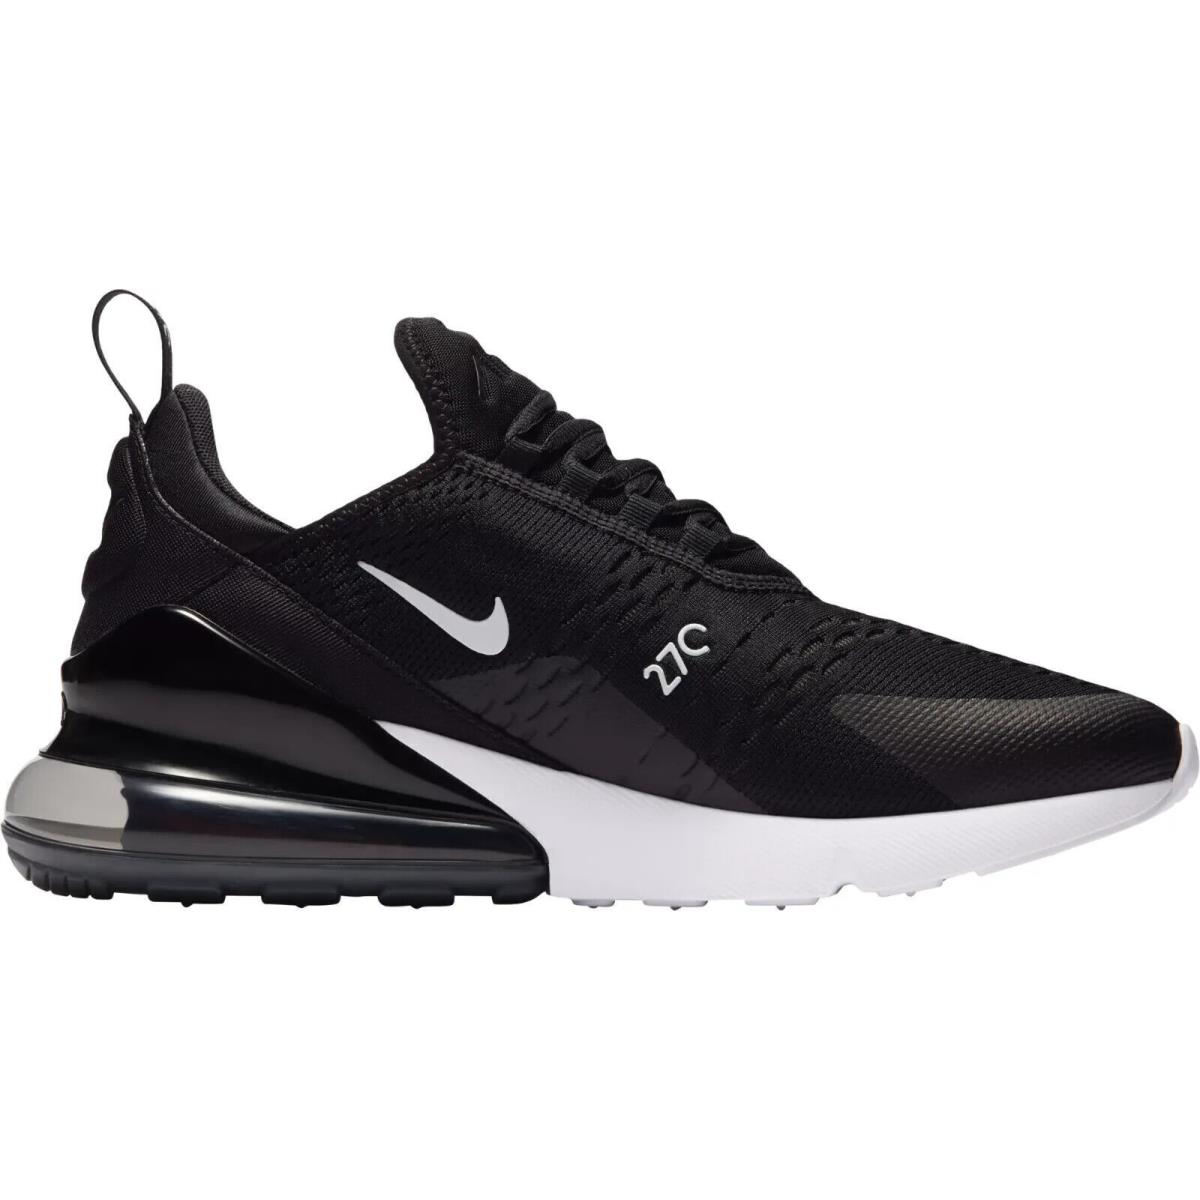 Nike Air Max 270 Men`s Casual Shoes All Colors US Sizes 7-14 Black/White/Solar Red/Anthracite